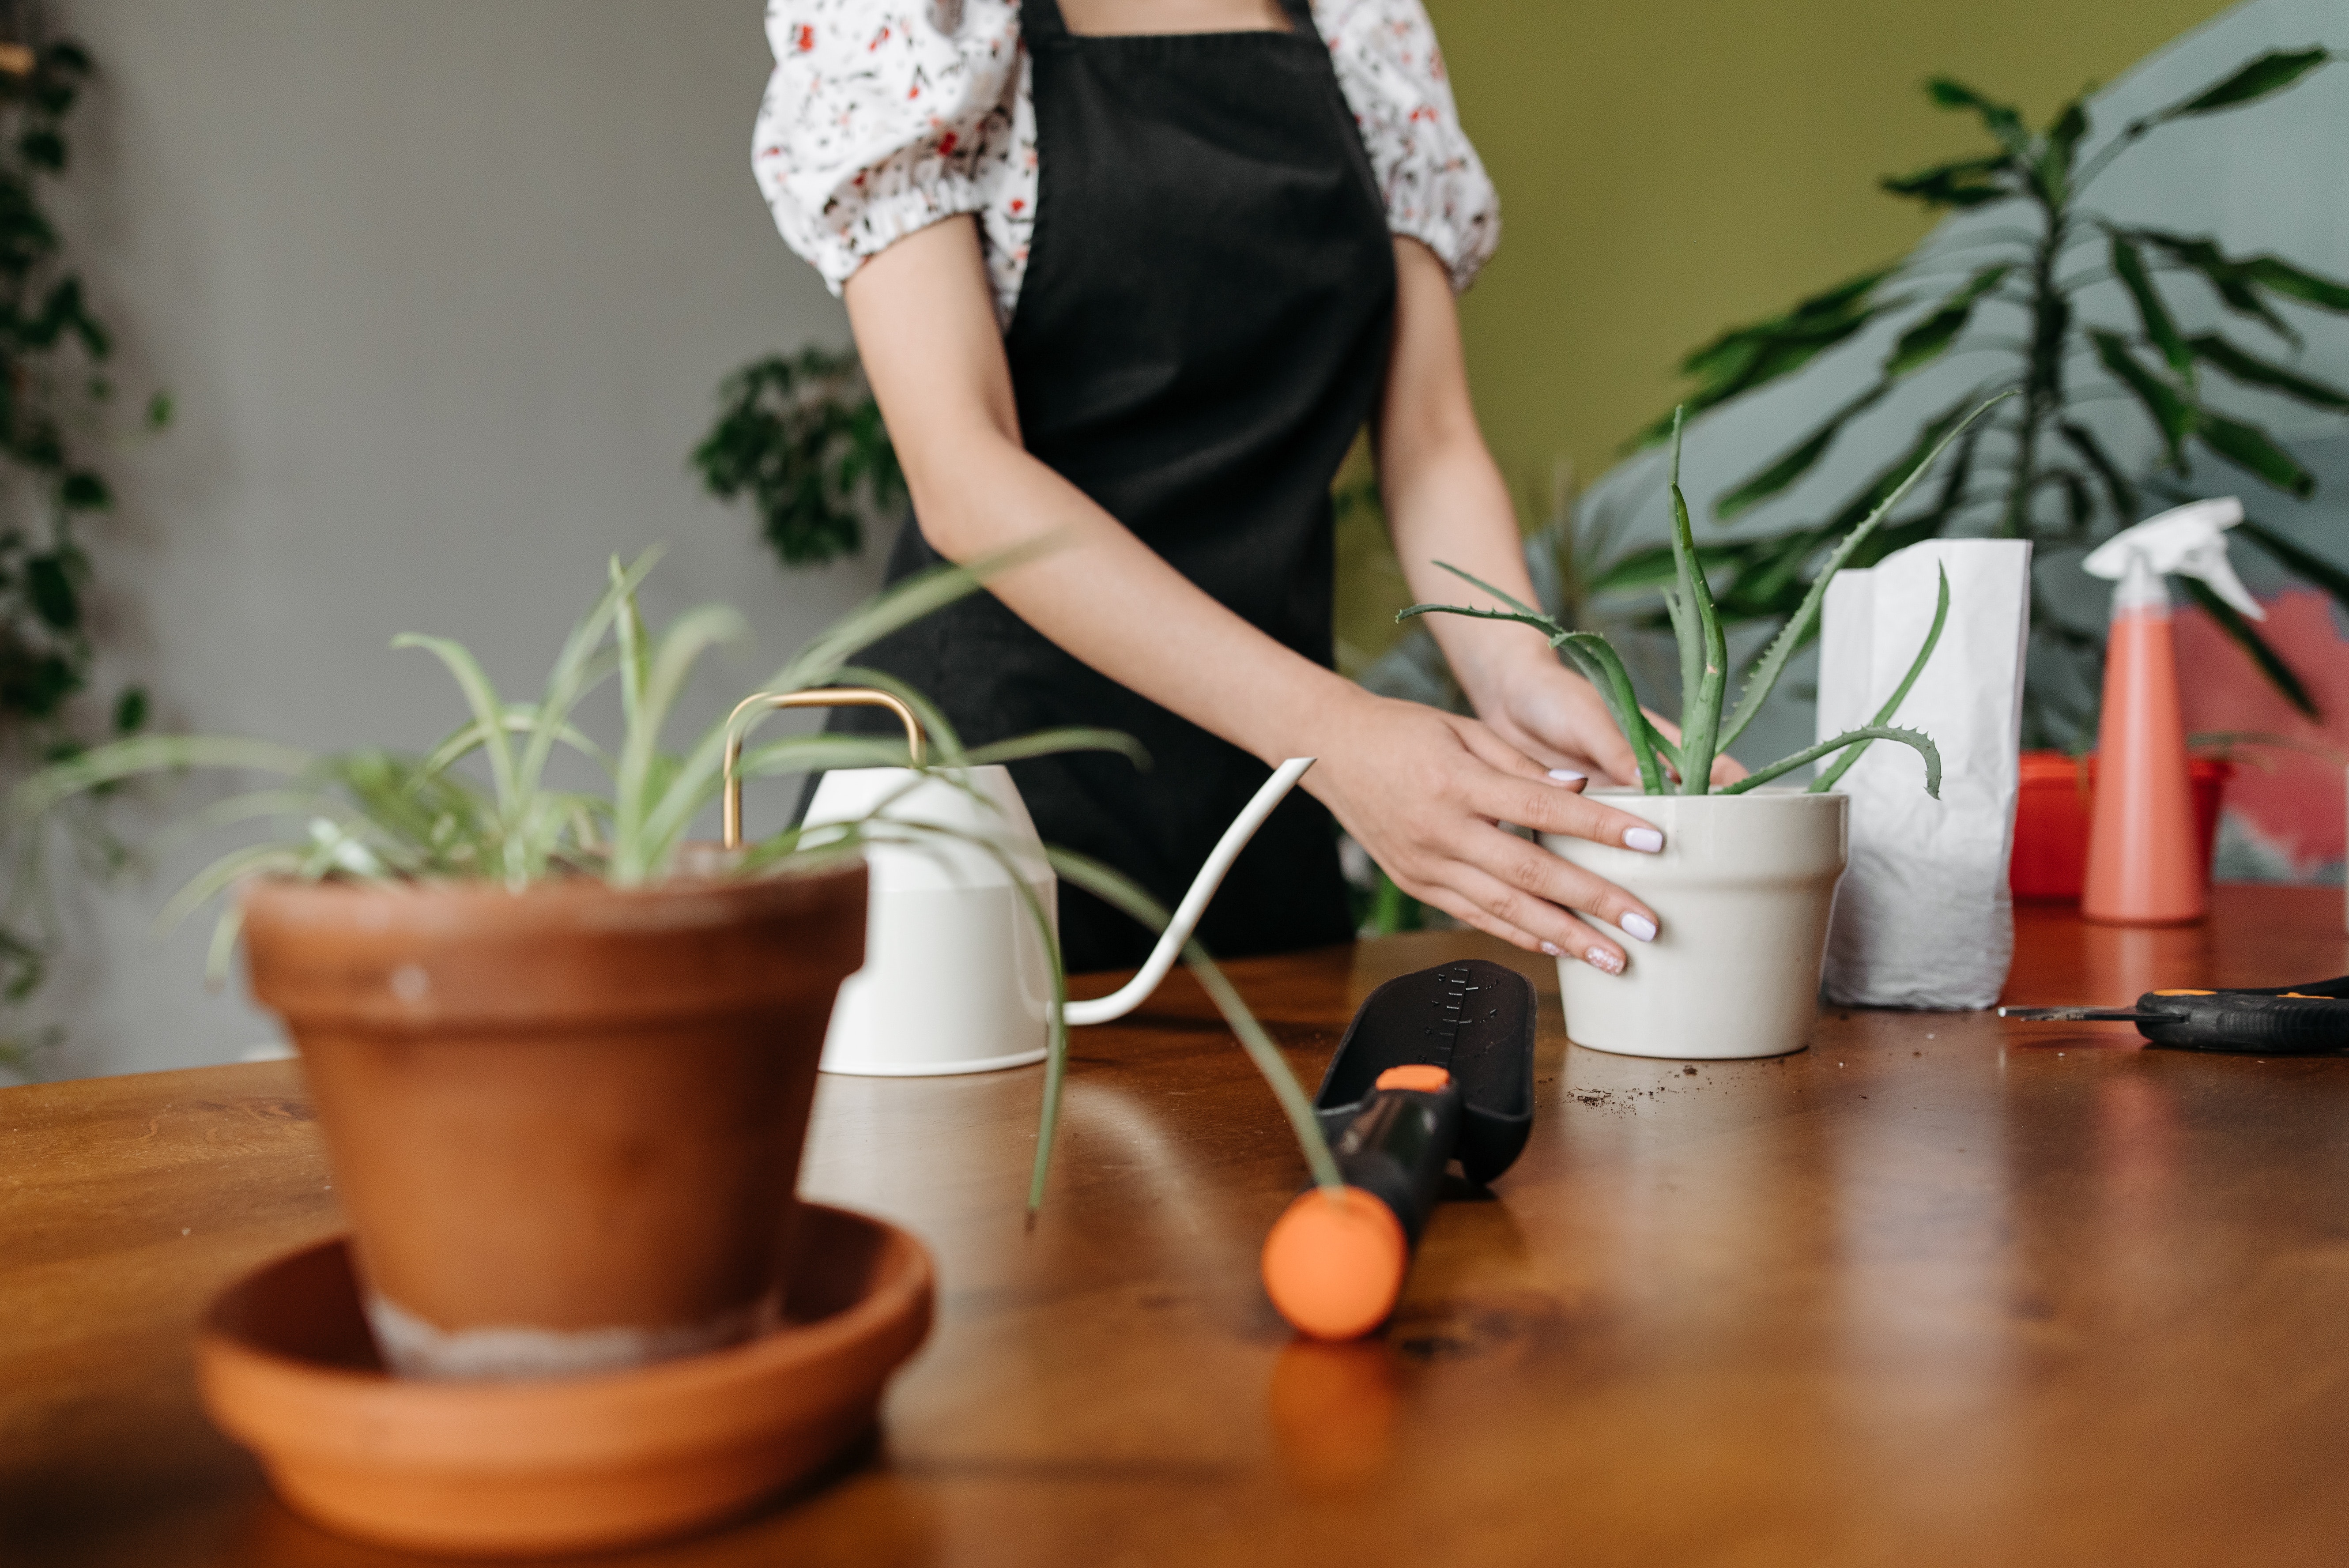 A woman and her aloe vera plants. | Source: Pexels